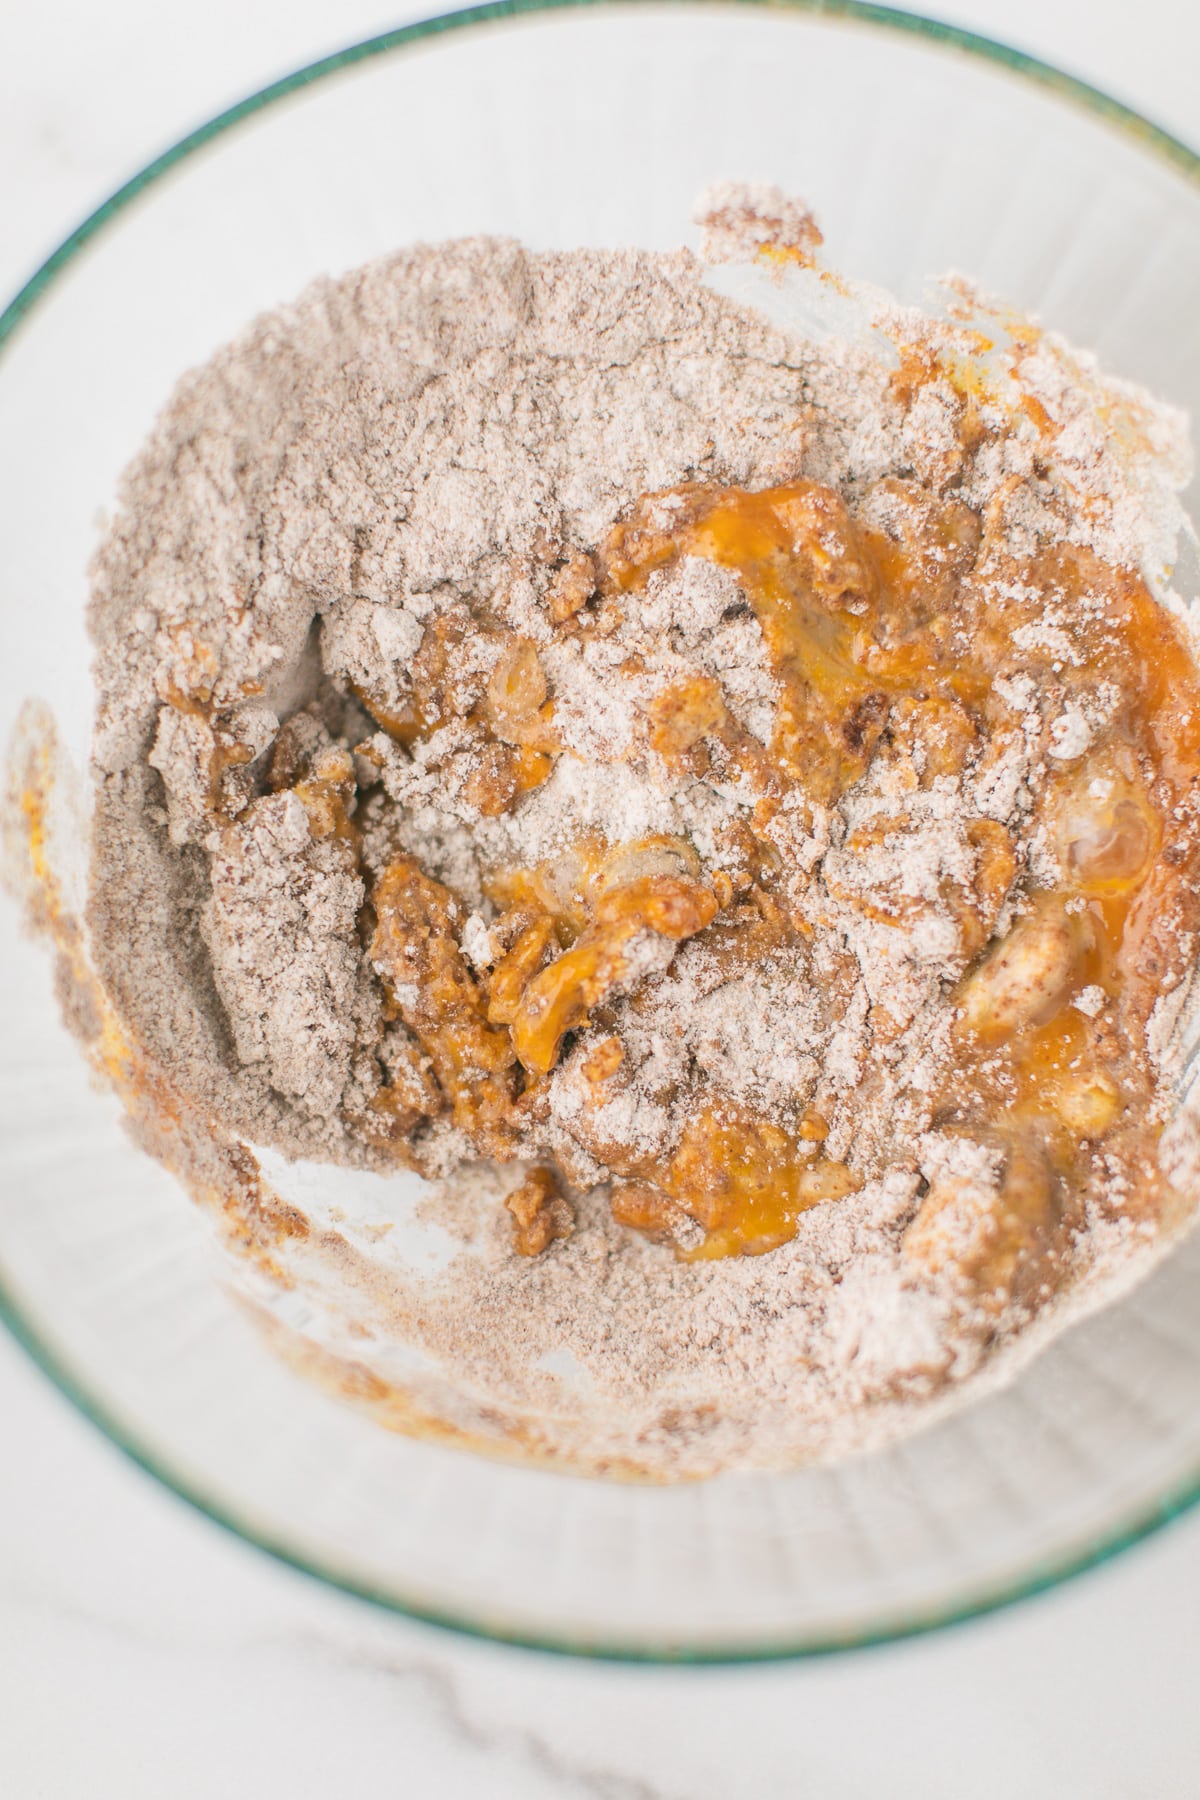 wet and dry ingredients in a mixing bowl